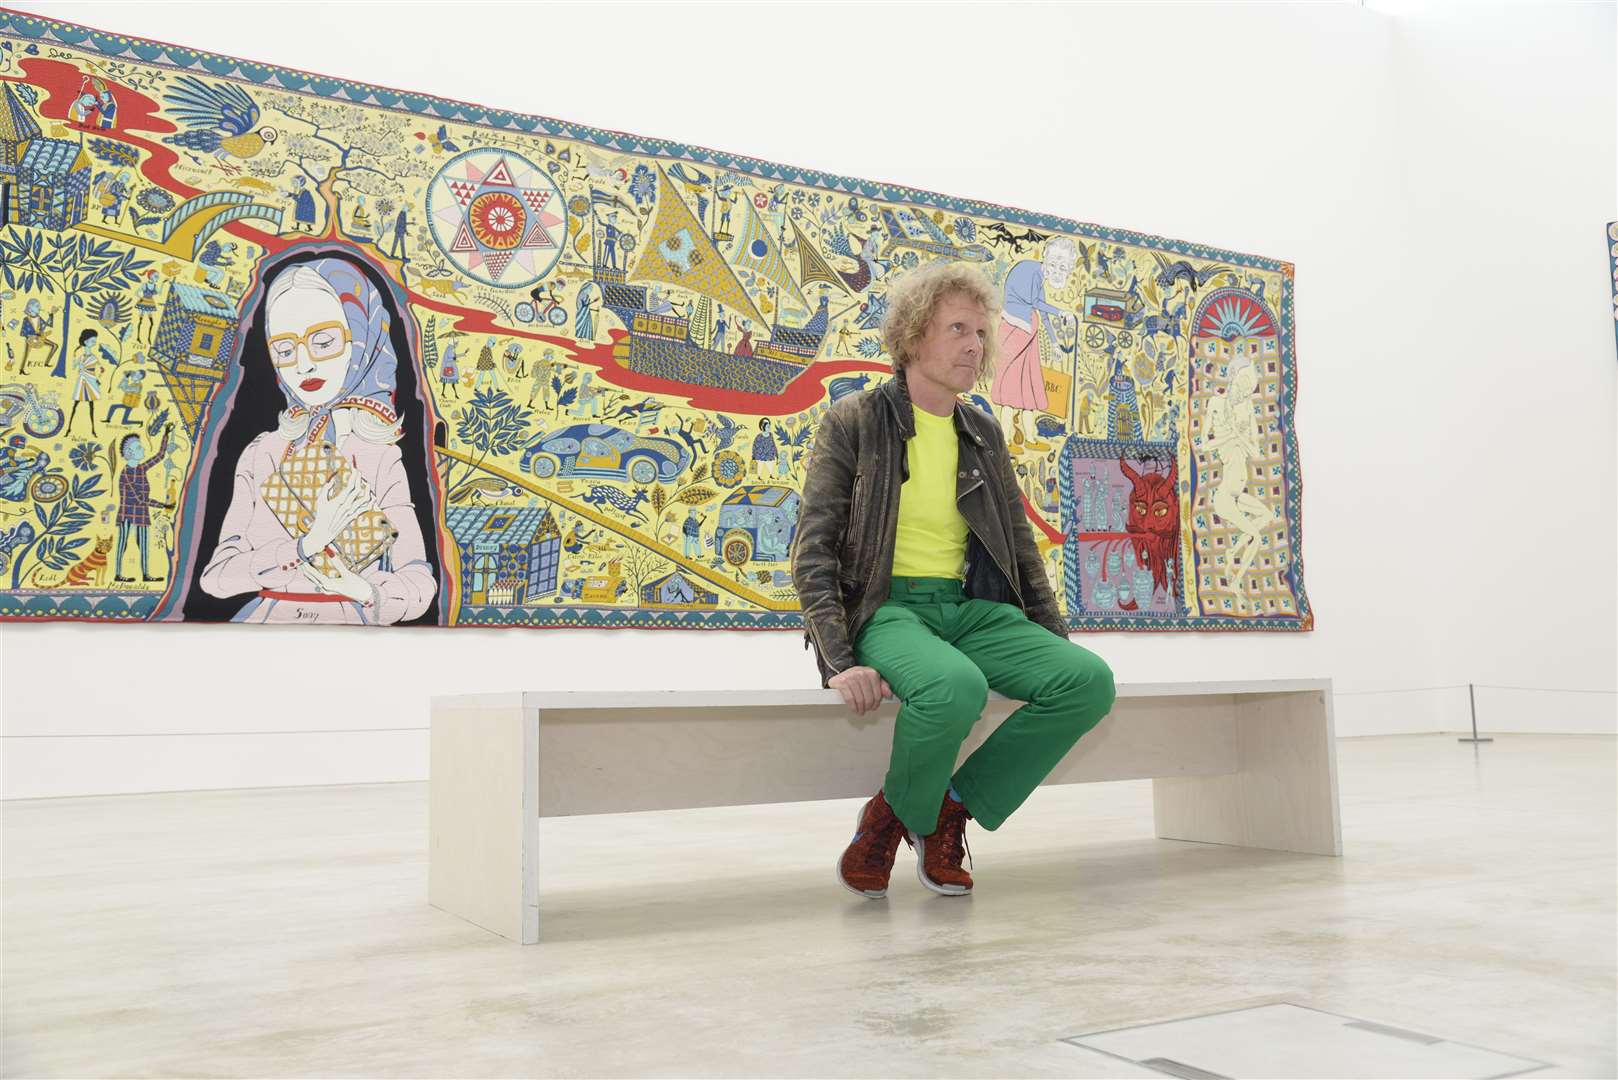 Grayson Perry, minus his frock, at the opening of an exhibition at the Turner in Margate in 2015